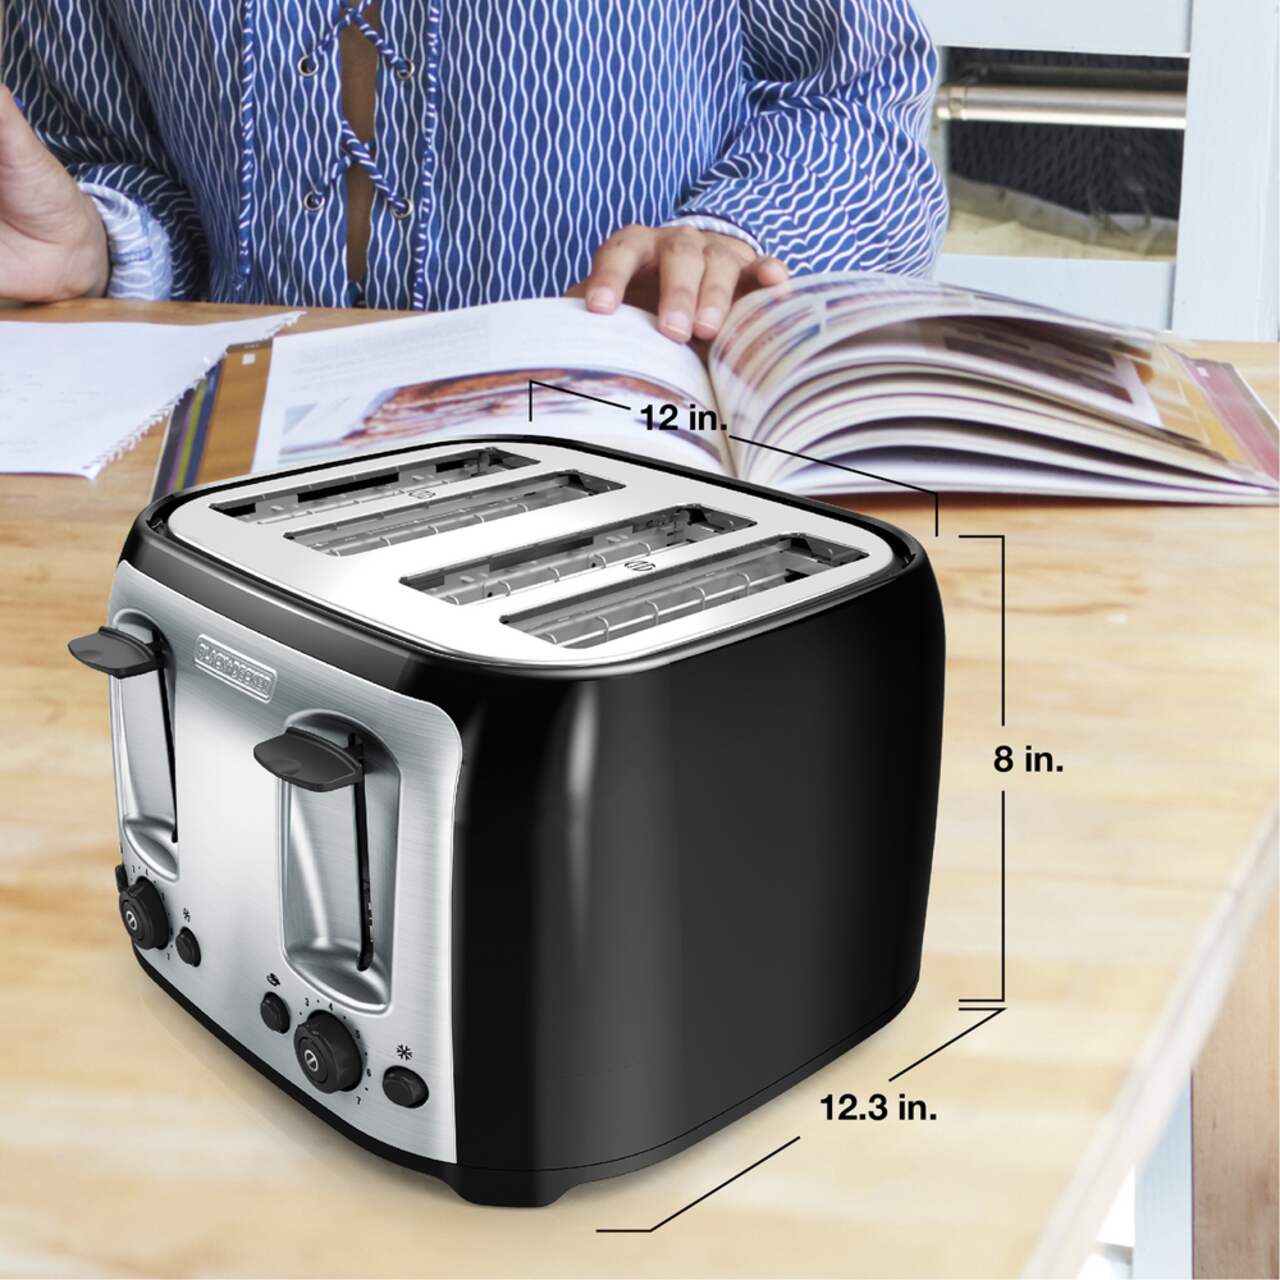 Best Deal in Canada  Black Decker Tr1478bd 4 Slice Toaster-Black TR1478BD  - Canada's best deals on Electronics, TVs, Unlocked Cell Phones, Macbooks,  Laptops, Kitchen Appliances, Toys, Bed and Bathroom products, Heaters